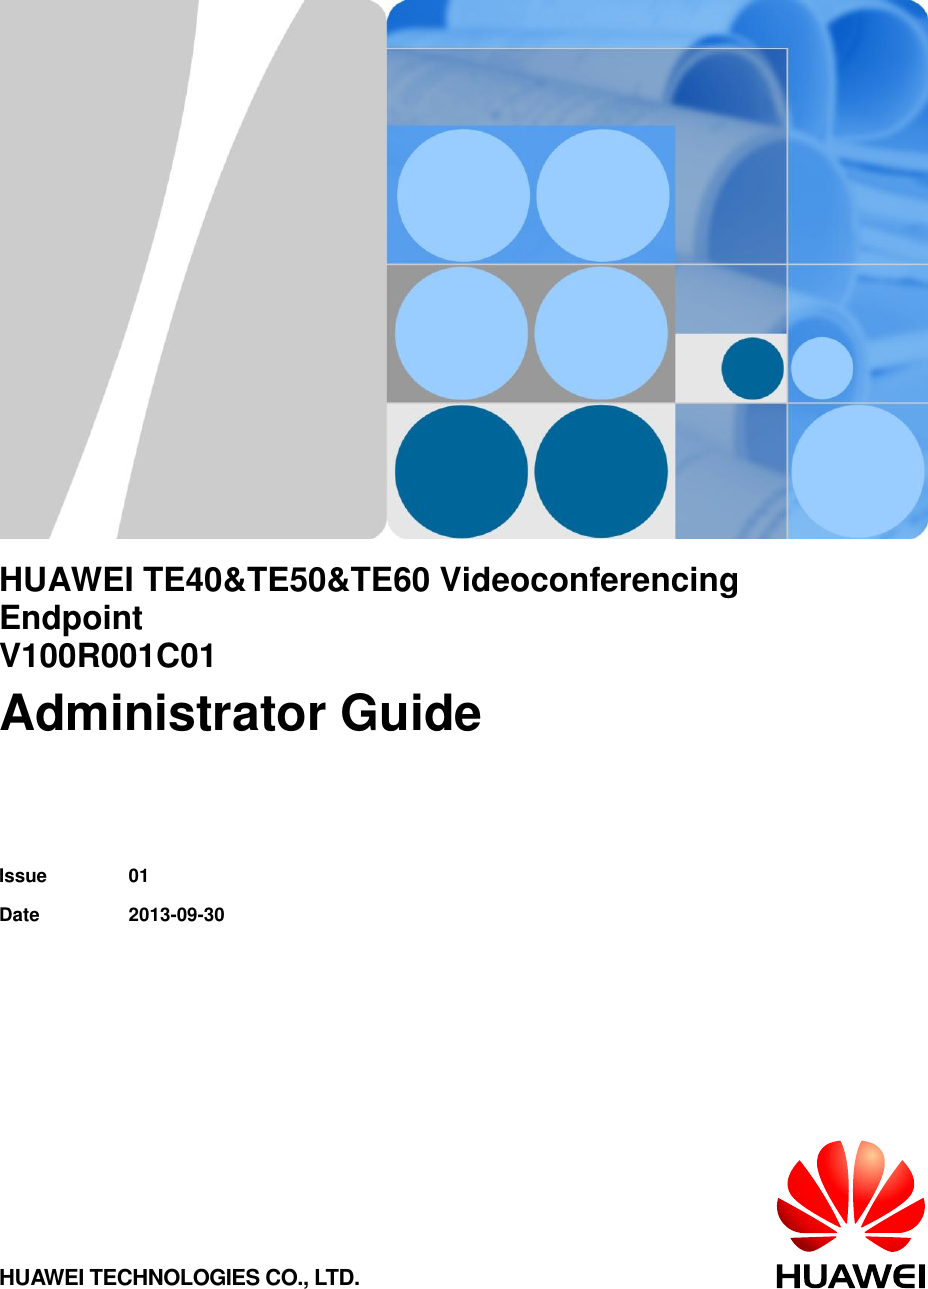         HUAWEI TE40&amp;TE50&amp;TE60 Videoconferencing Endpoint V100R001C01 Administrator Guide   Issue 01 Date 2013-09-30 HUAWEI TECHNOLOGIES CO., LTD. 